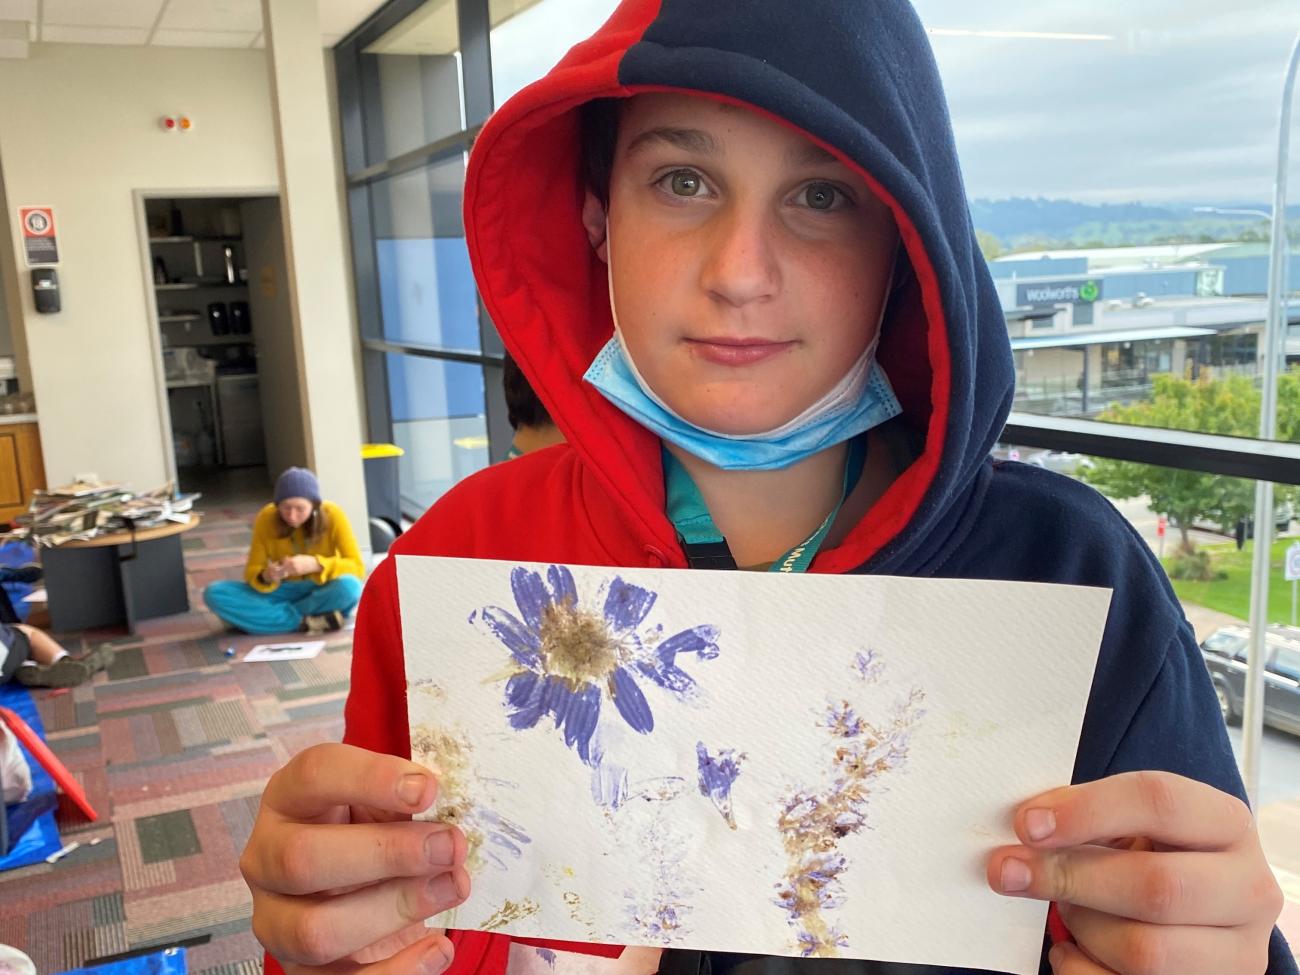 Student holding their completed flower press art